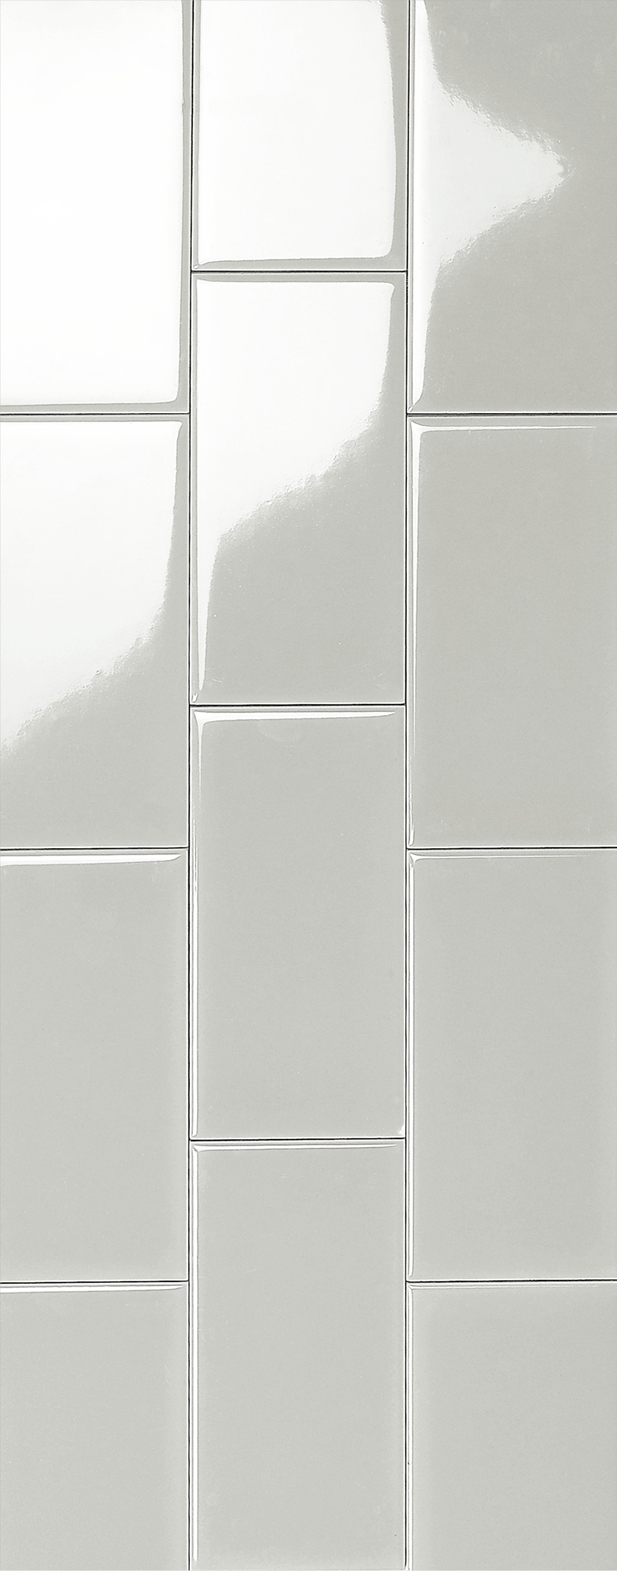 CBM white kitchen wall tiles from manufacturer for flats-1